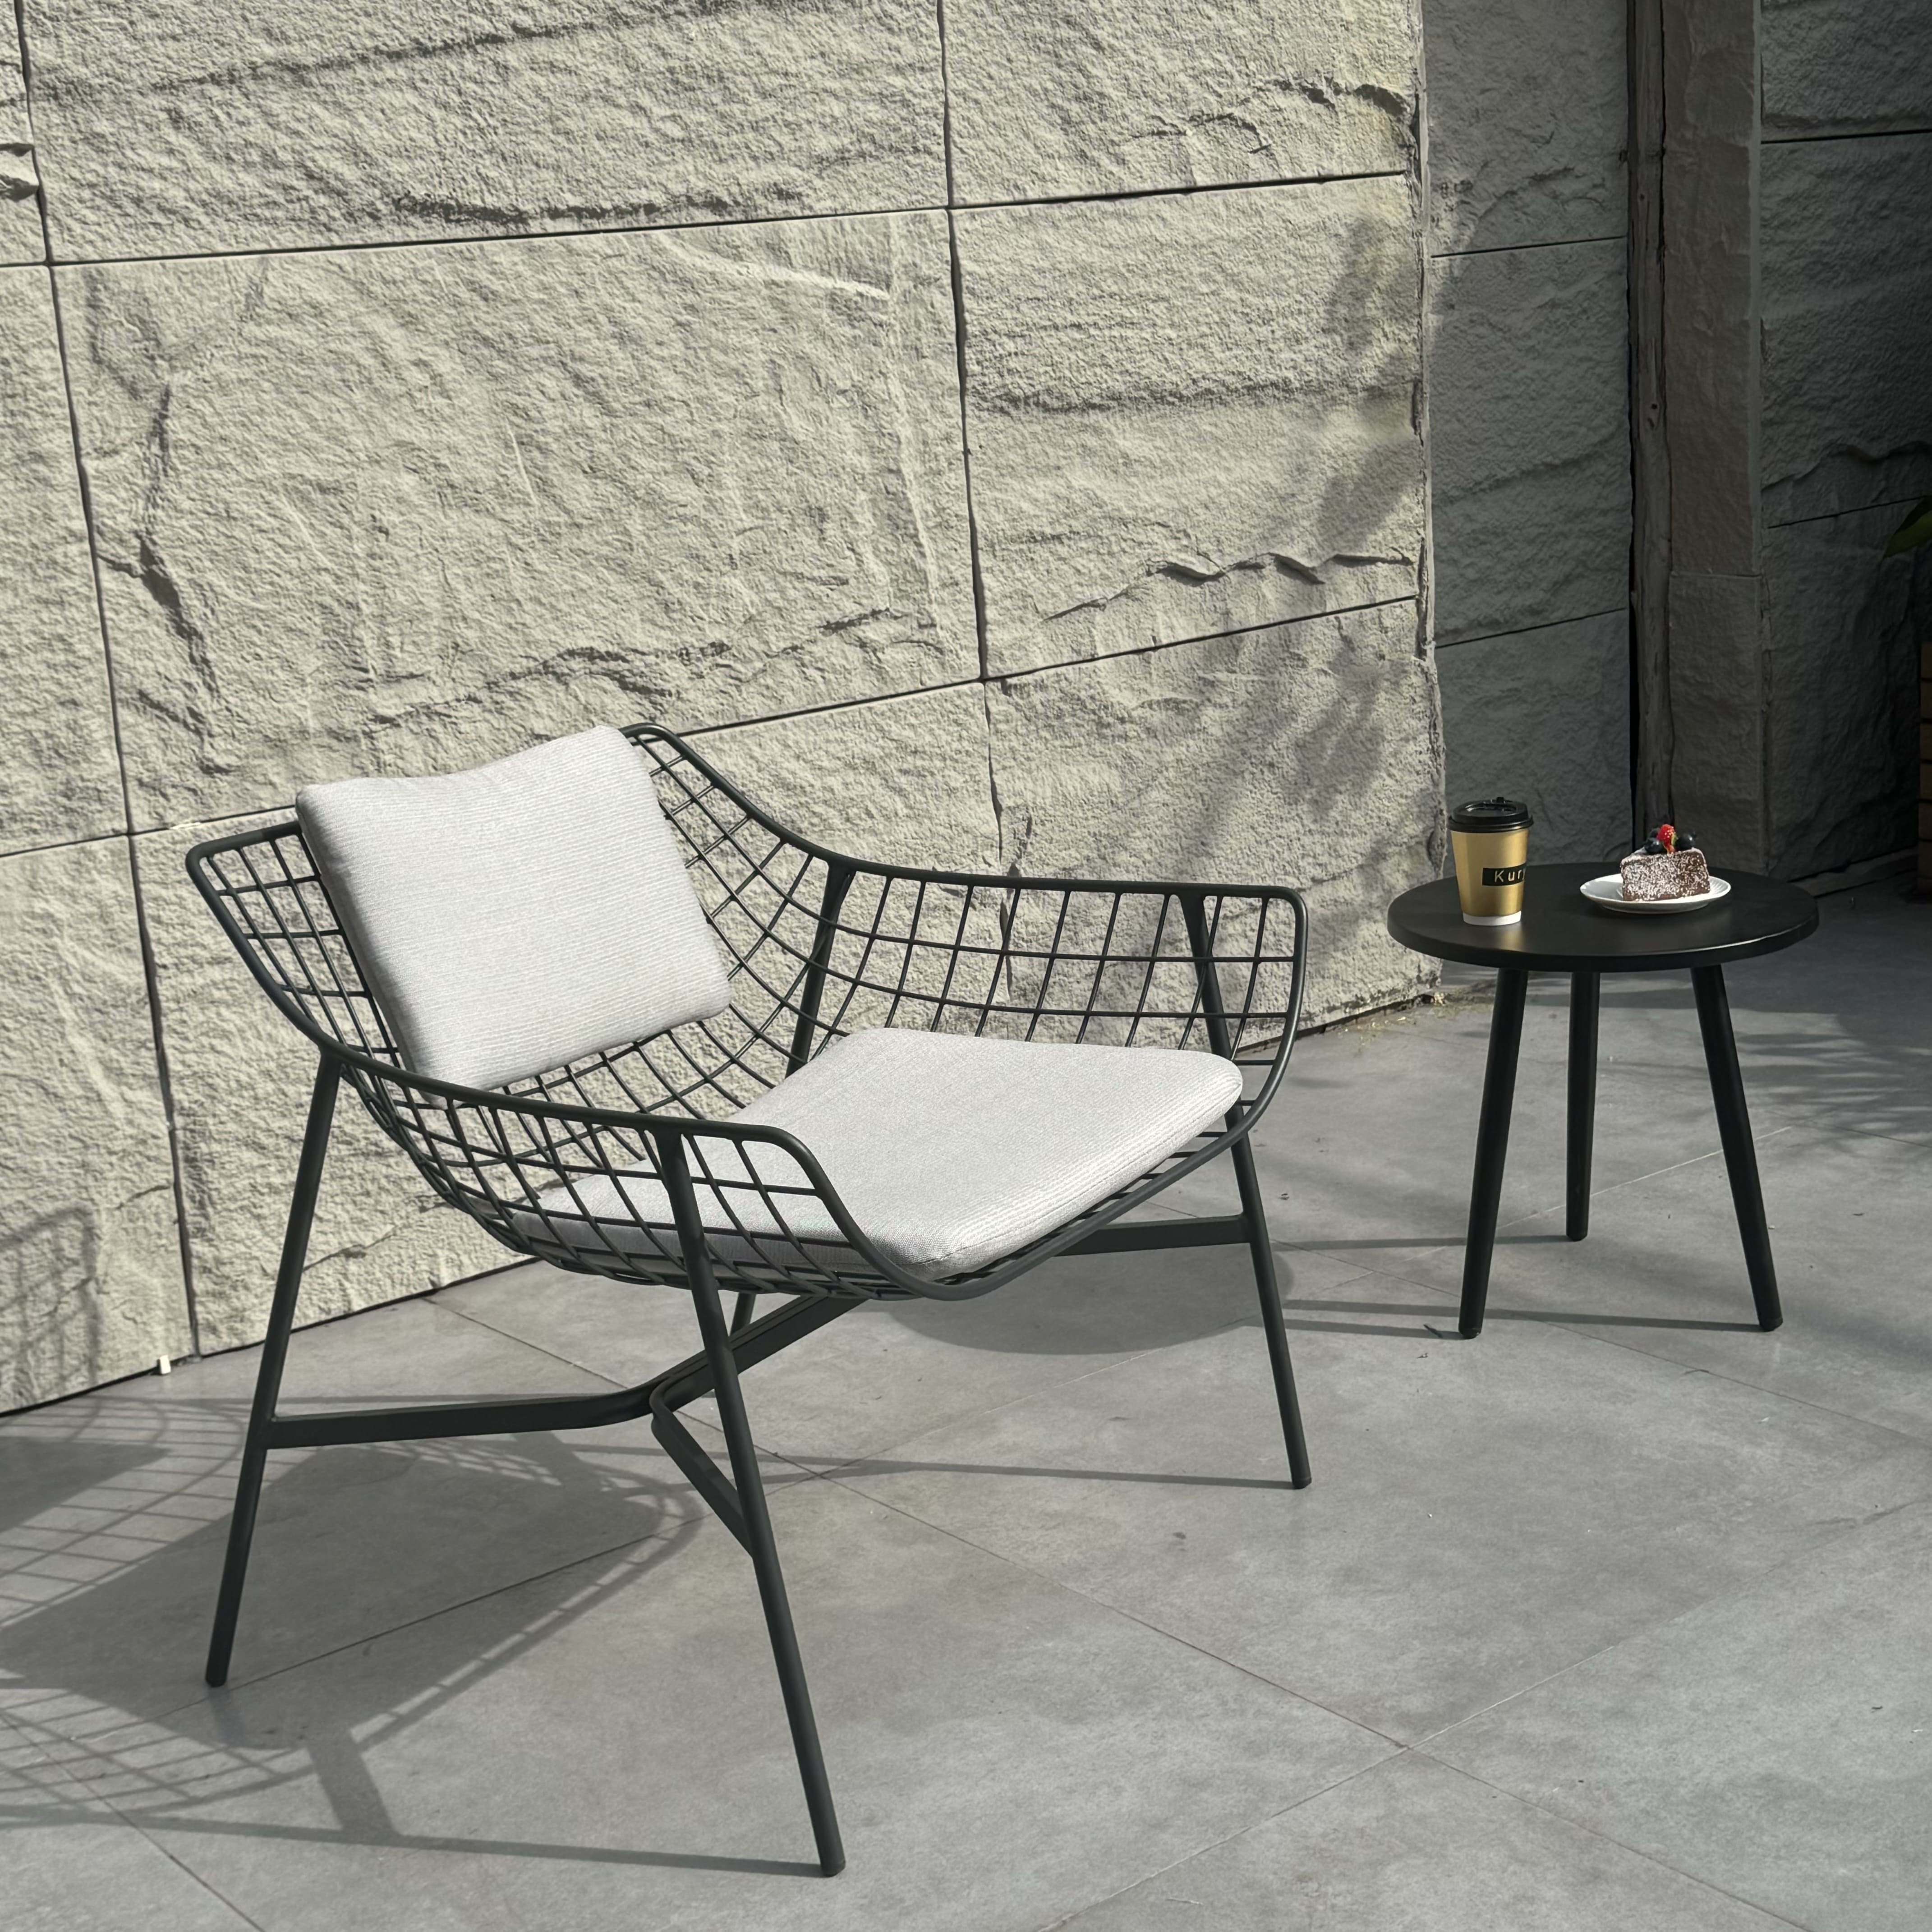 Garden Furniture Outdoor Sets For 6 Patio Dining Chairs